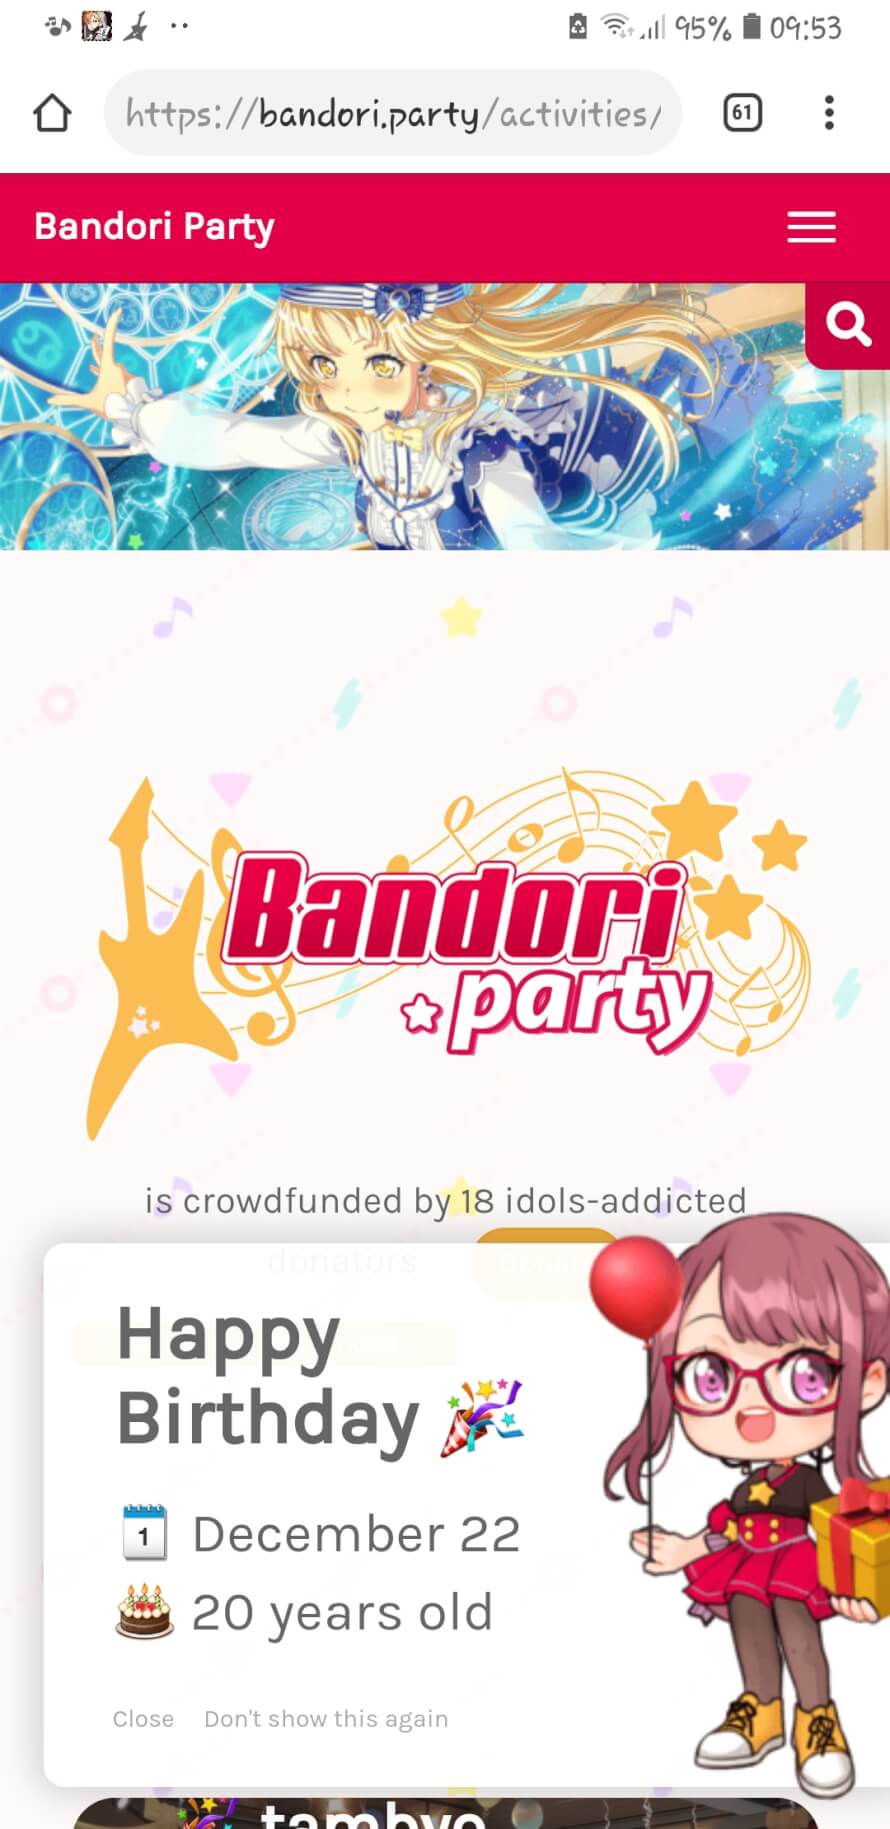 Hey it's my birthday and today I am officially 20 

Even Bandori Party has wished me happy...